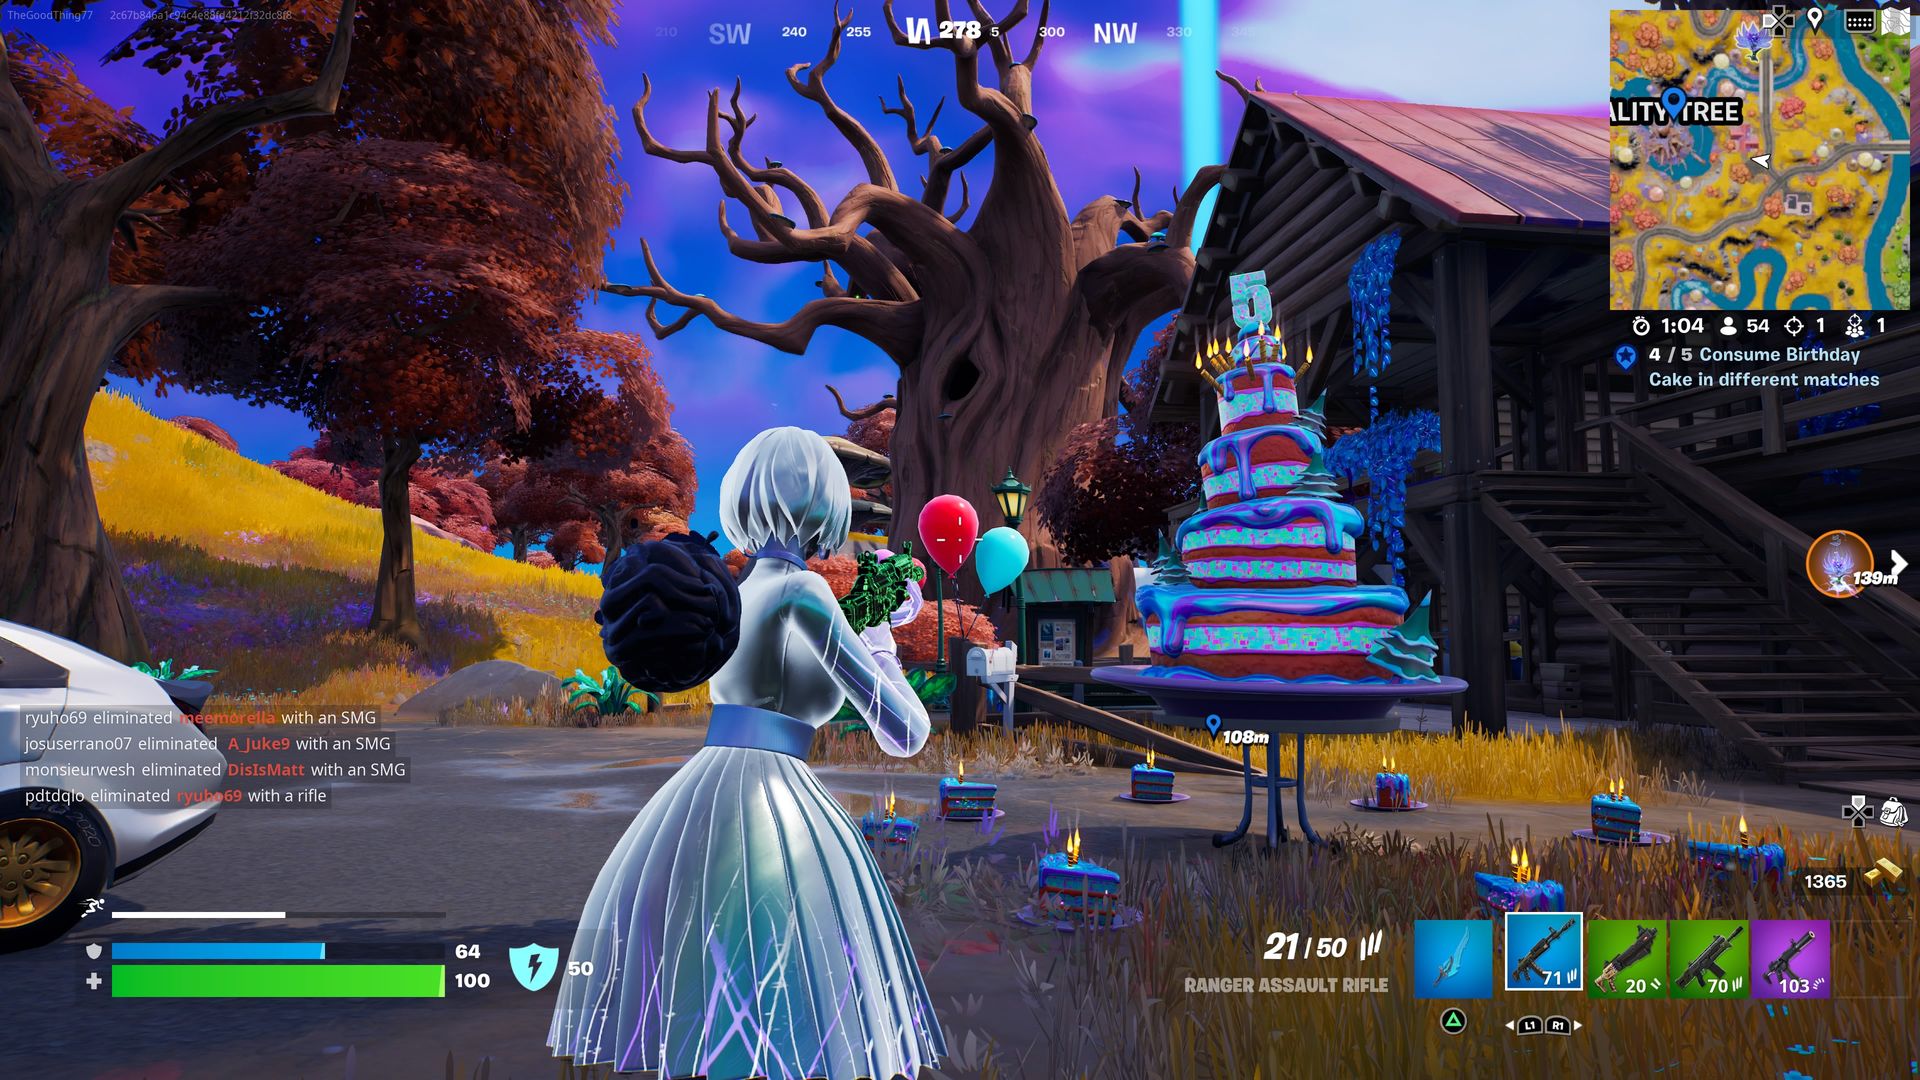 Fortnite Reality Tree Cake Loot Result